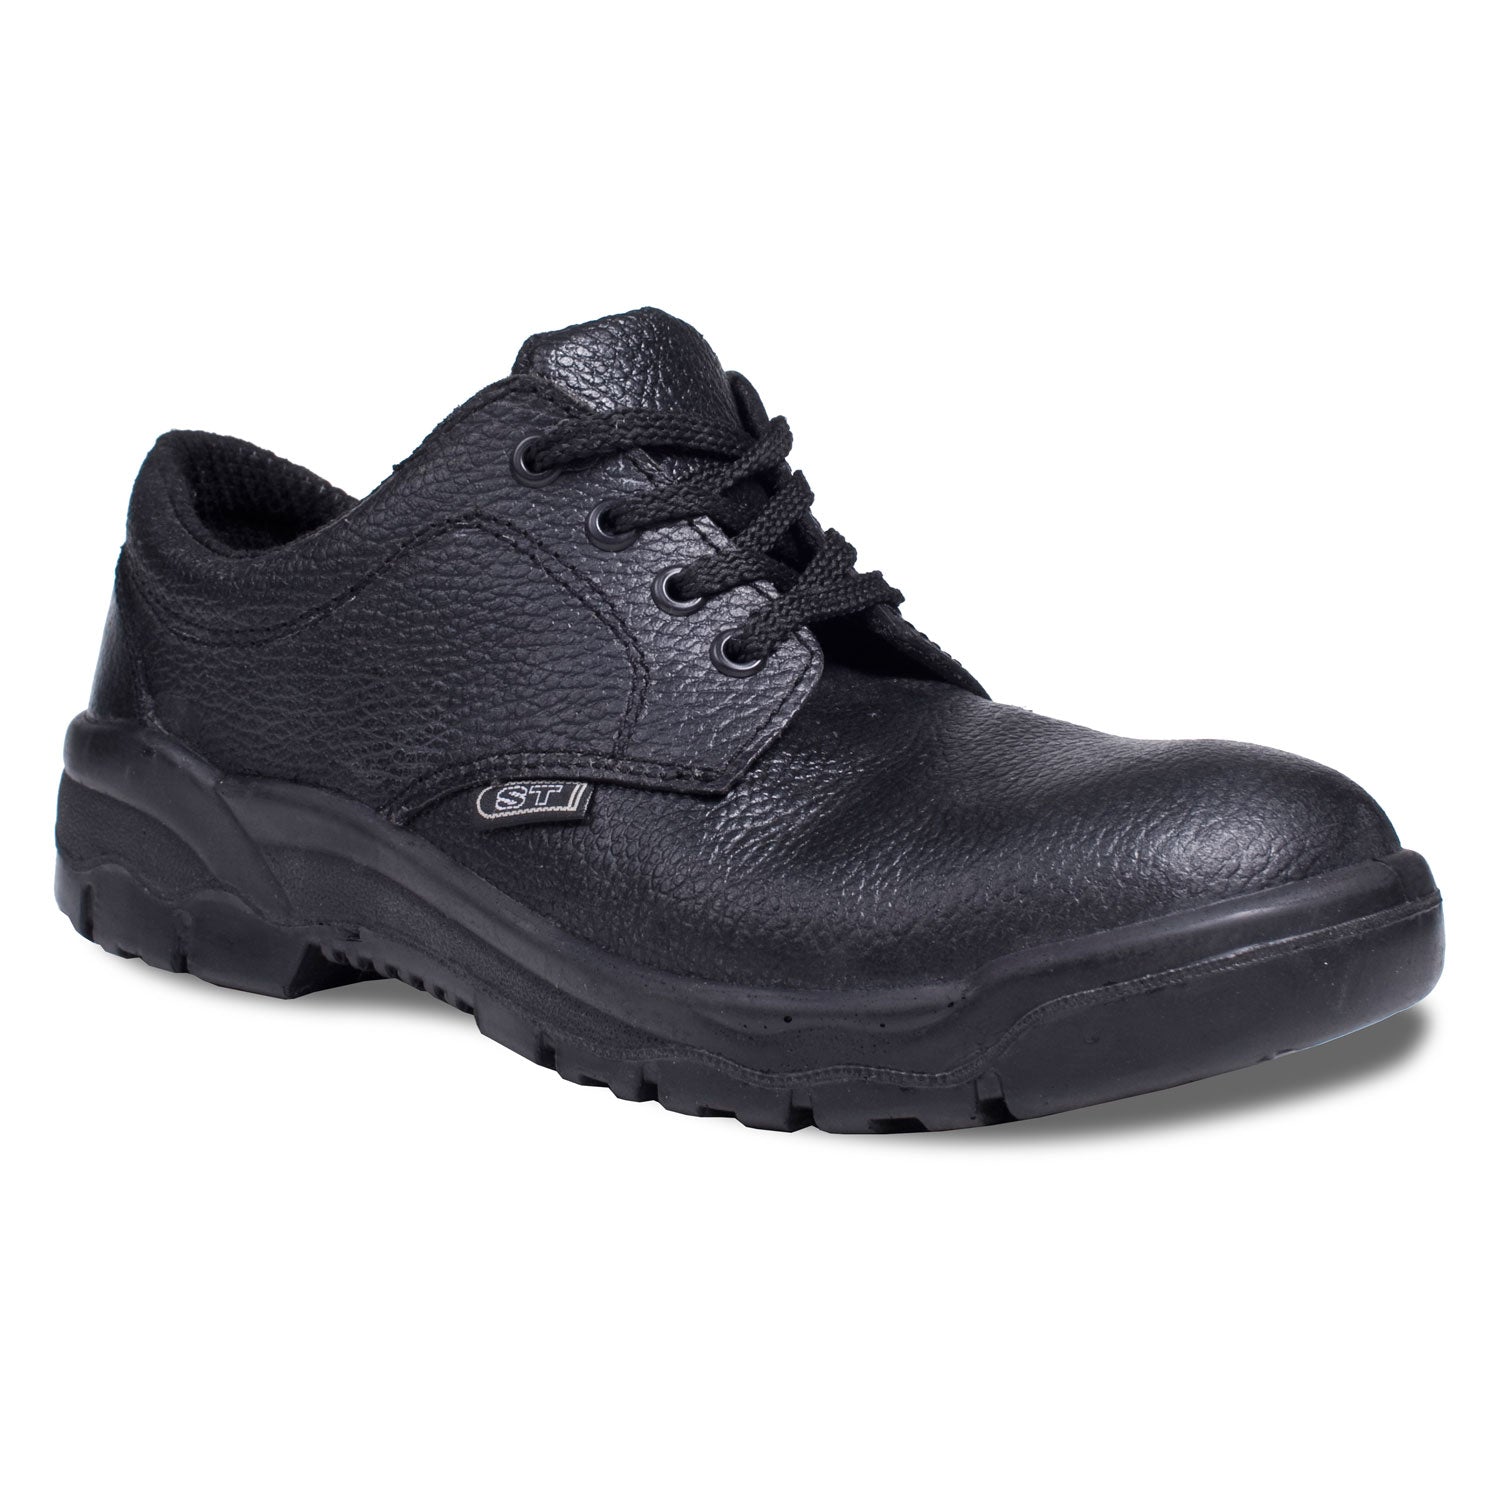 Supertouch Safety Shoe